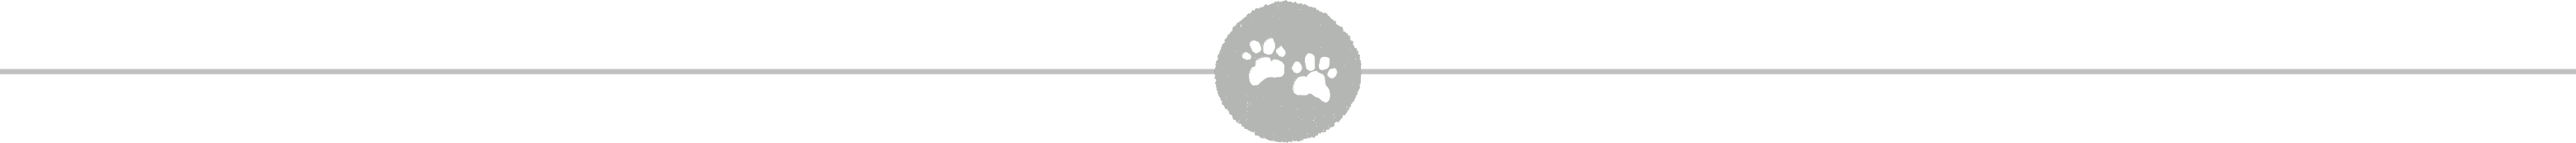 divider line with pawprint graphic